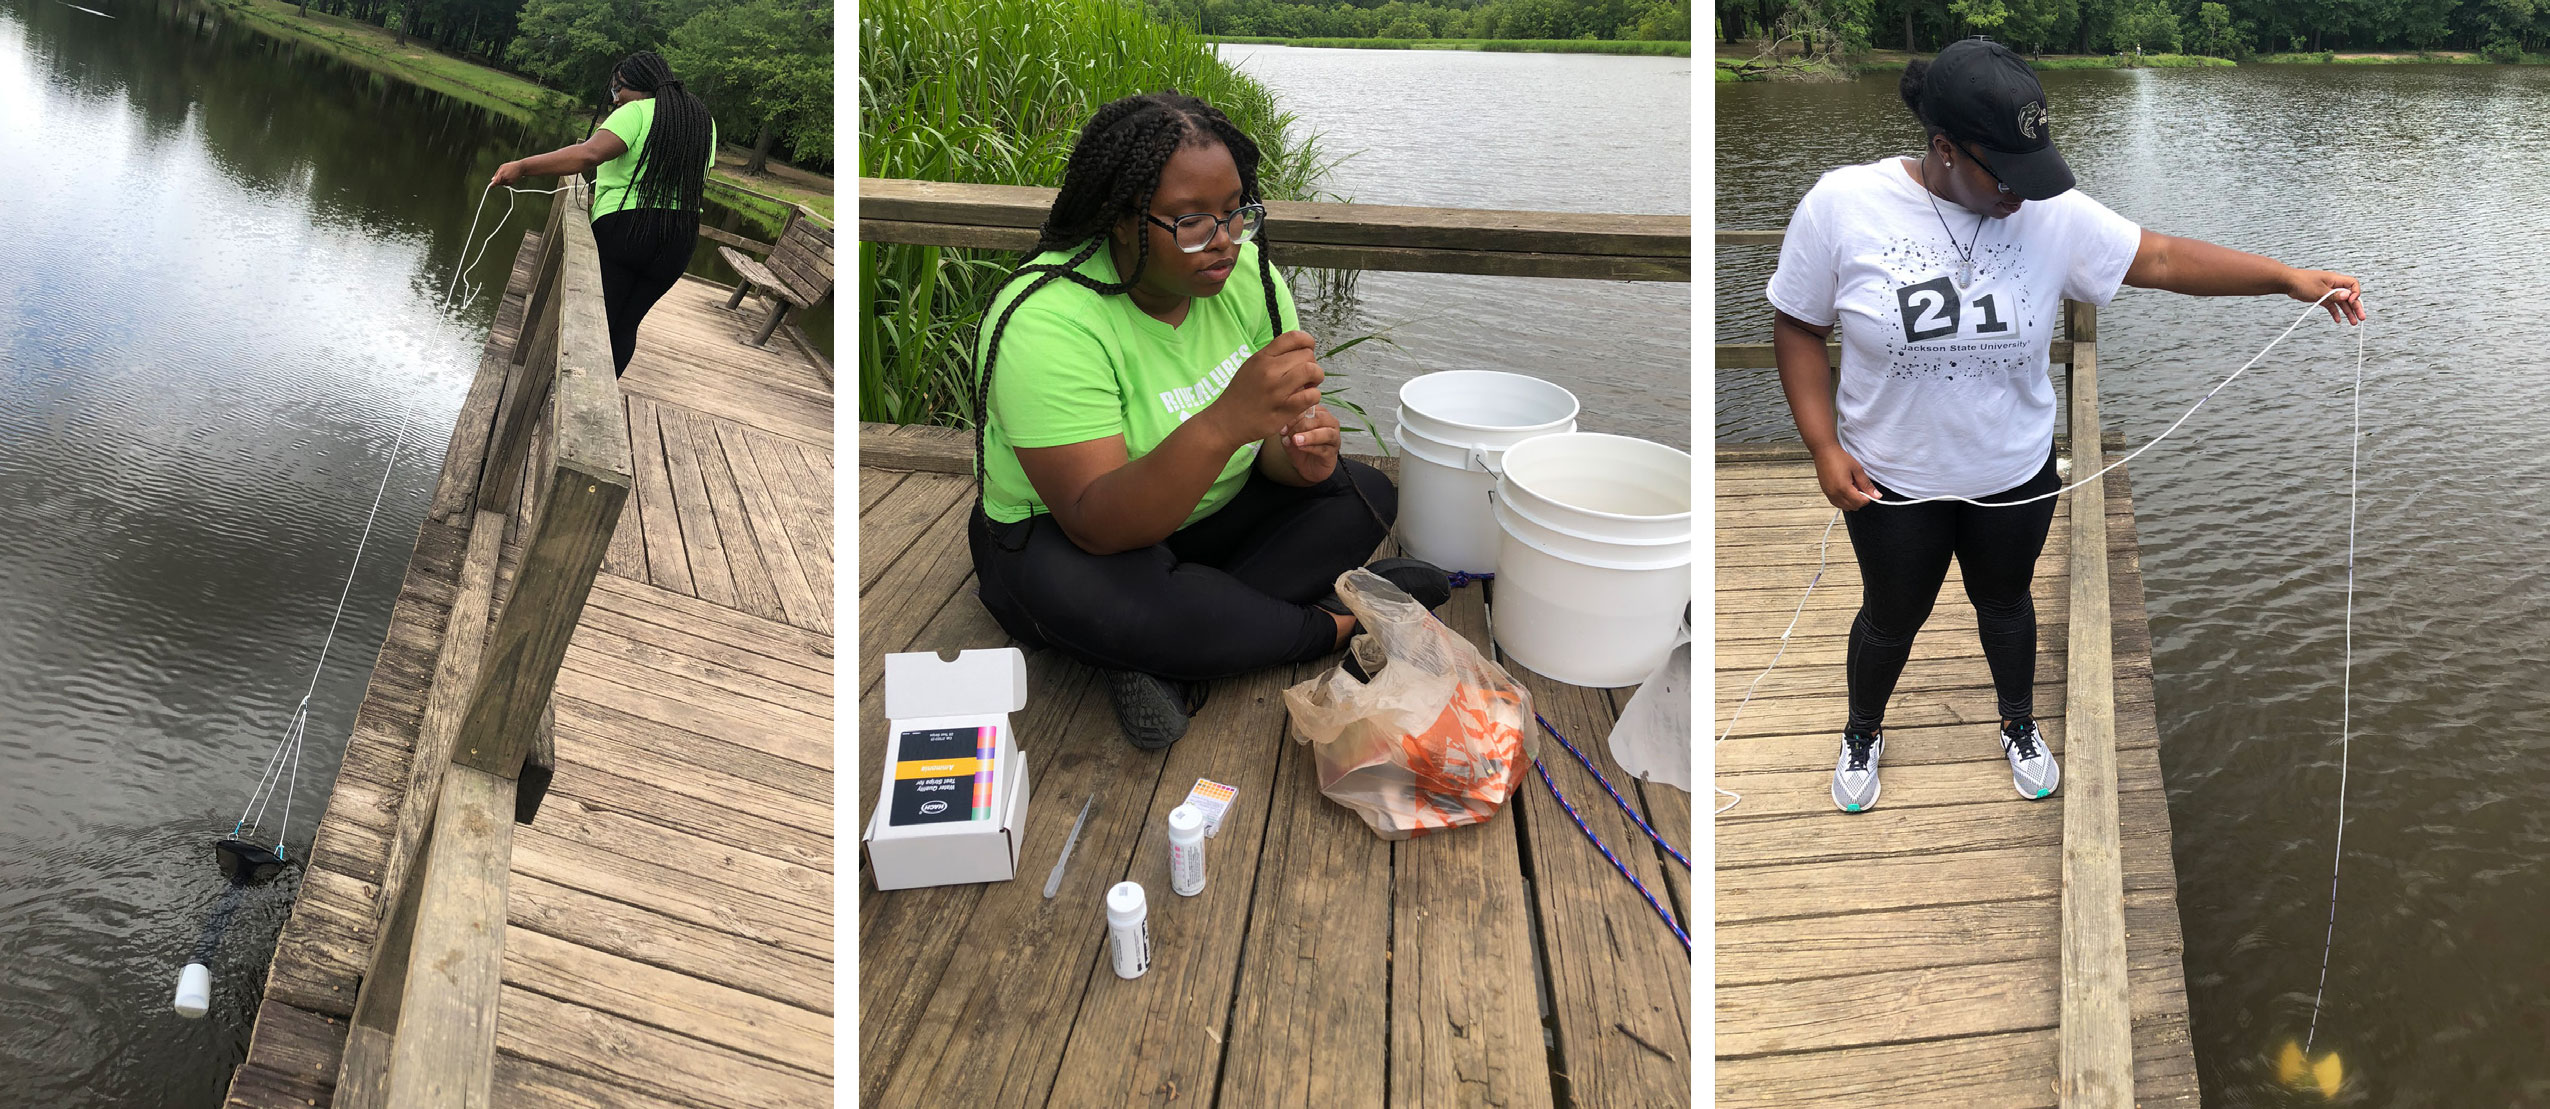 Virtual and Remote—Hands-On Undergraduate Research in Plankton Ecology  During the 2020 Pandemic: COVID-19 Can't Stop This!